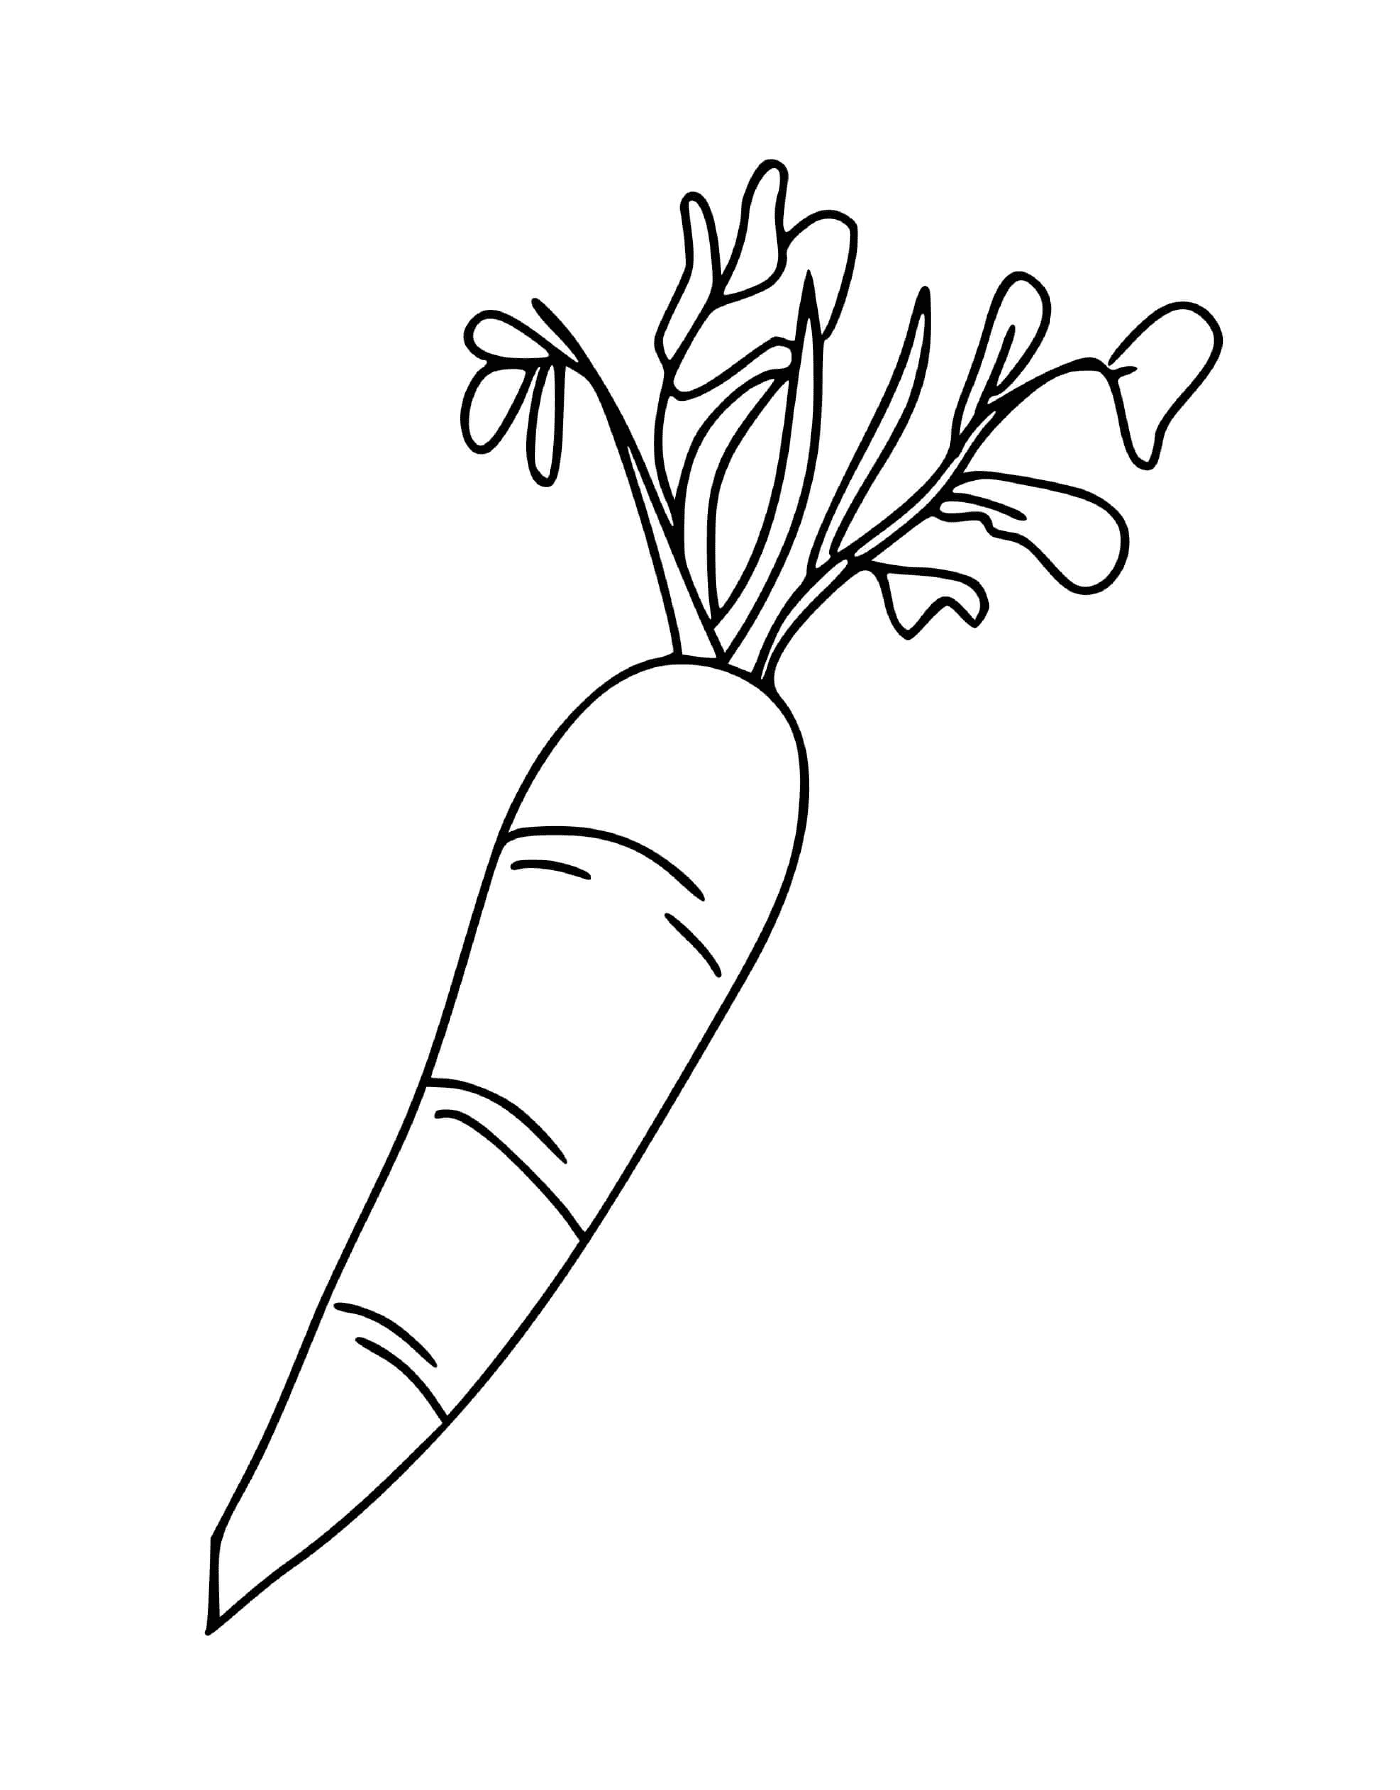  Carrot with green leaves 